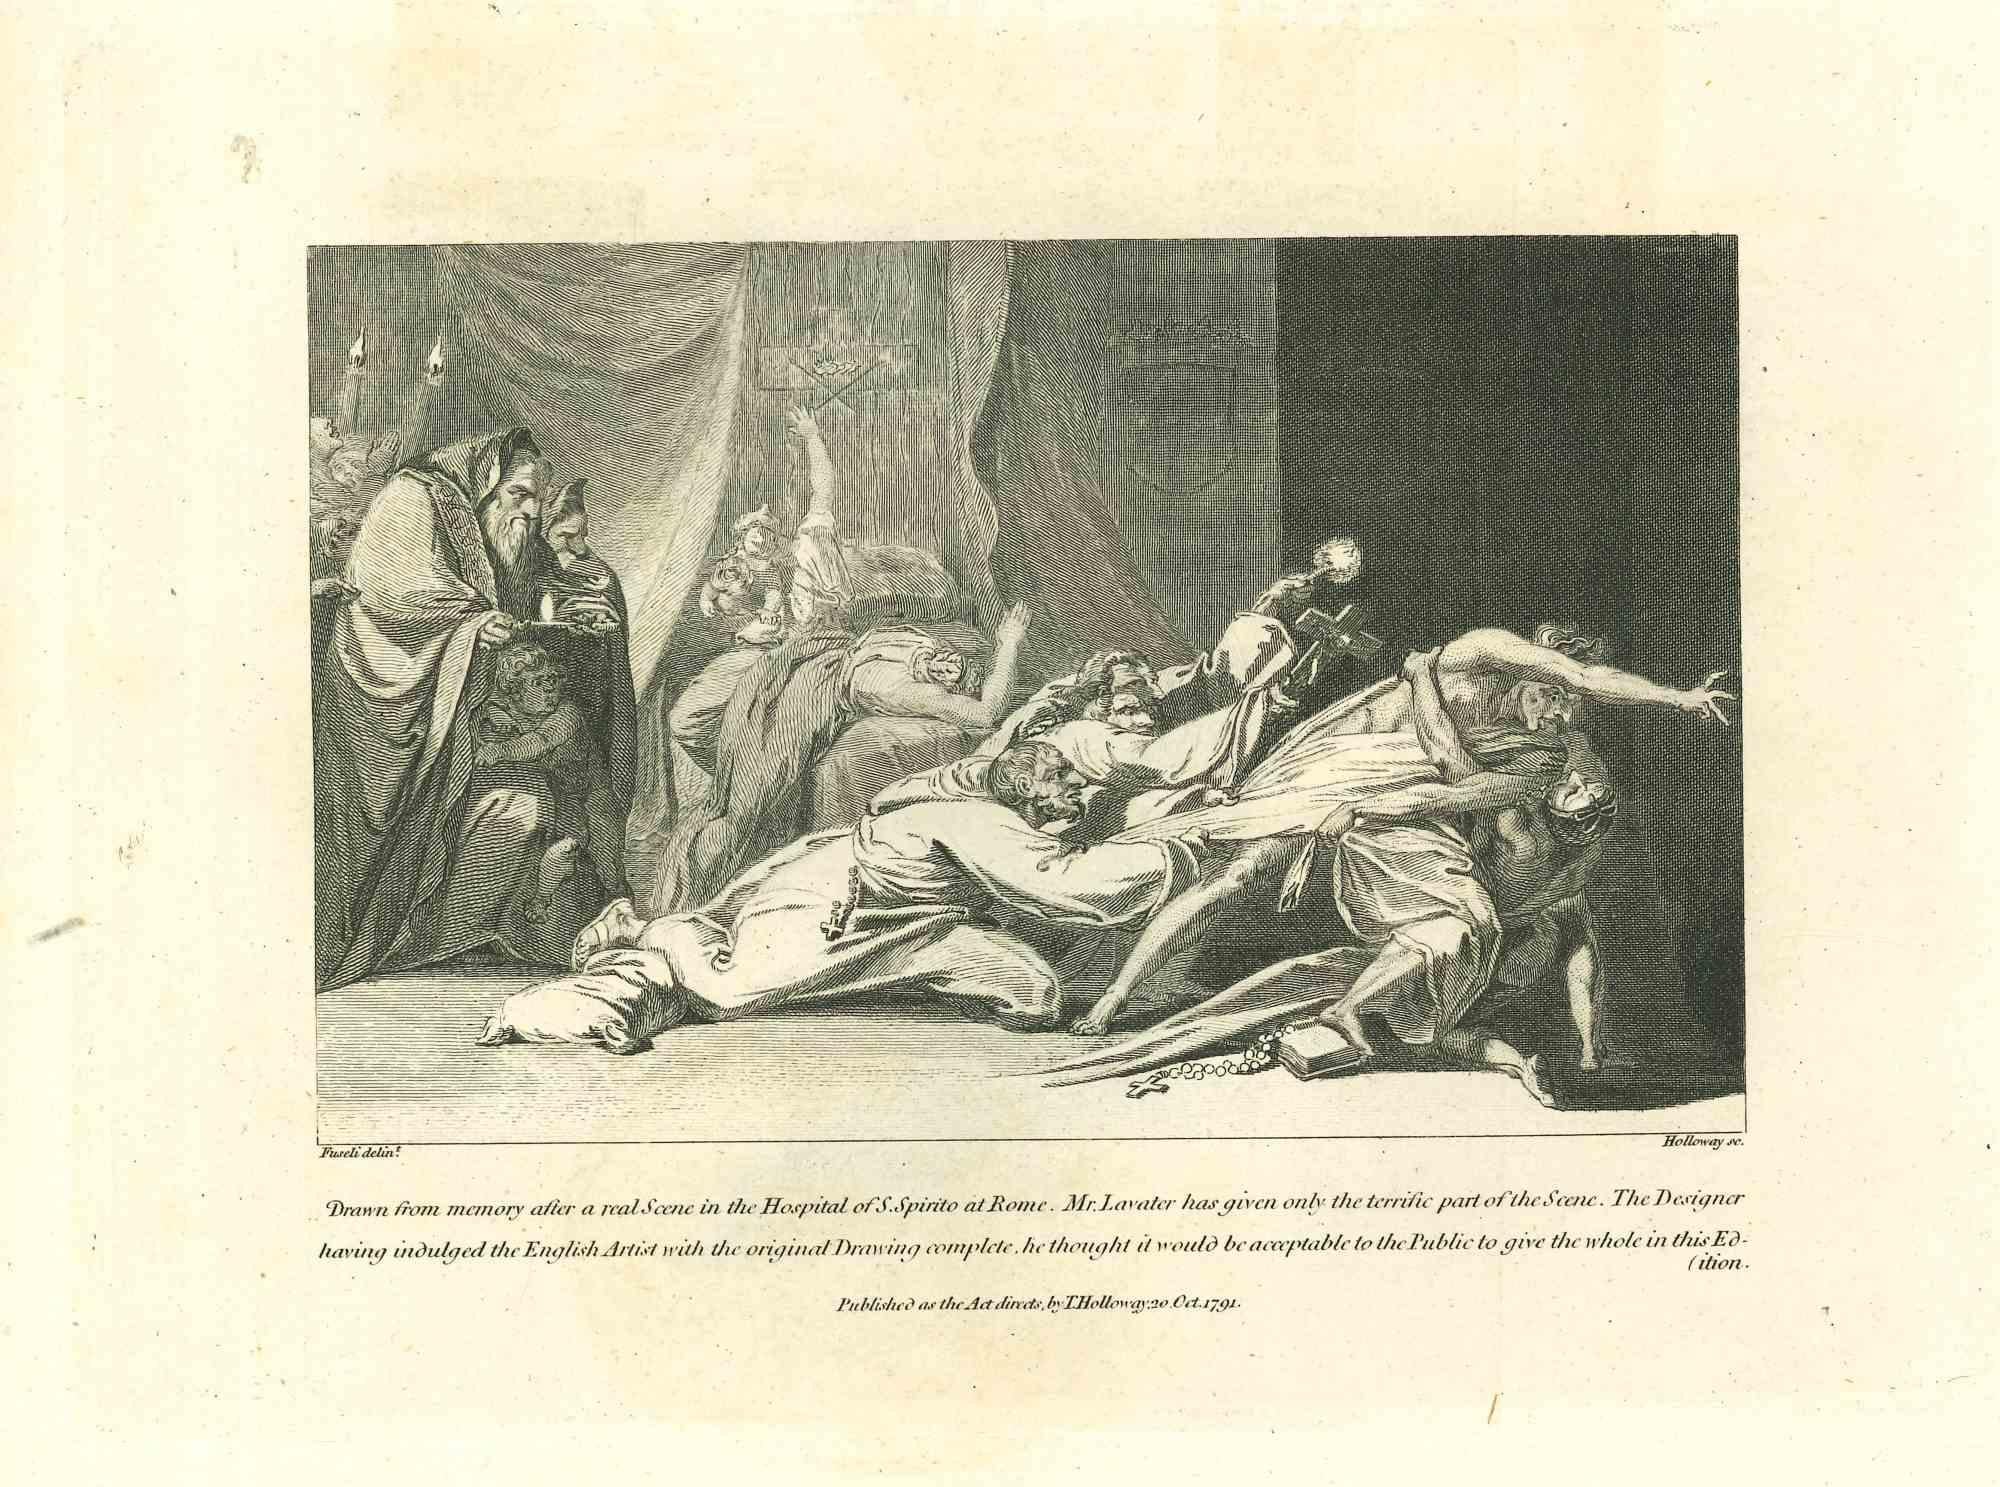 The Scene In The Hospital Of S.Spirito in Rome is an original etching artwork realized by Thomas Holloway after Fuseli for Johann Caspar Lavater's "Essays on Physiognomy, Designed to Promote the Knowledge and the Love of Mankind", London, Bensley,